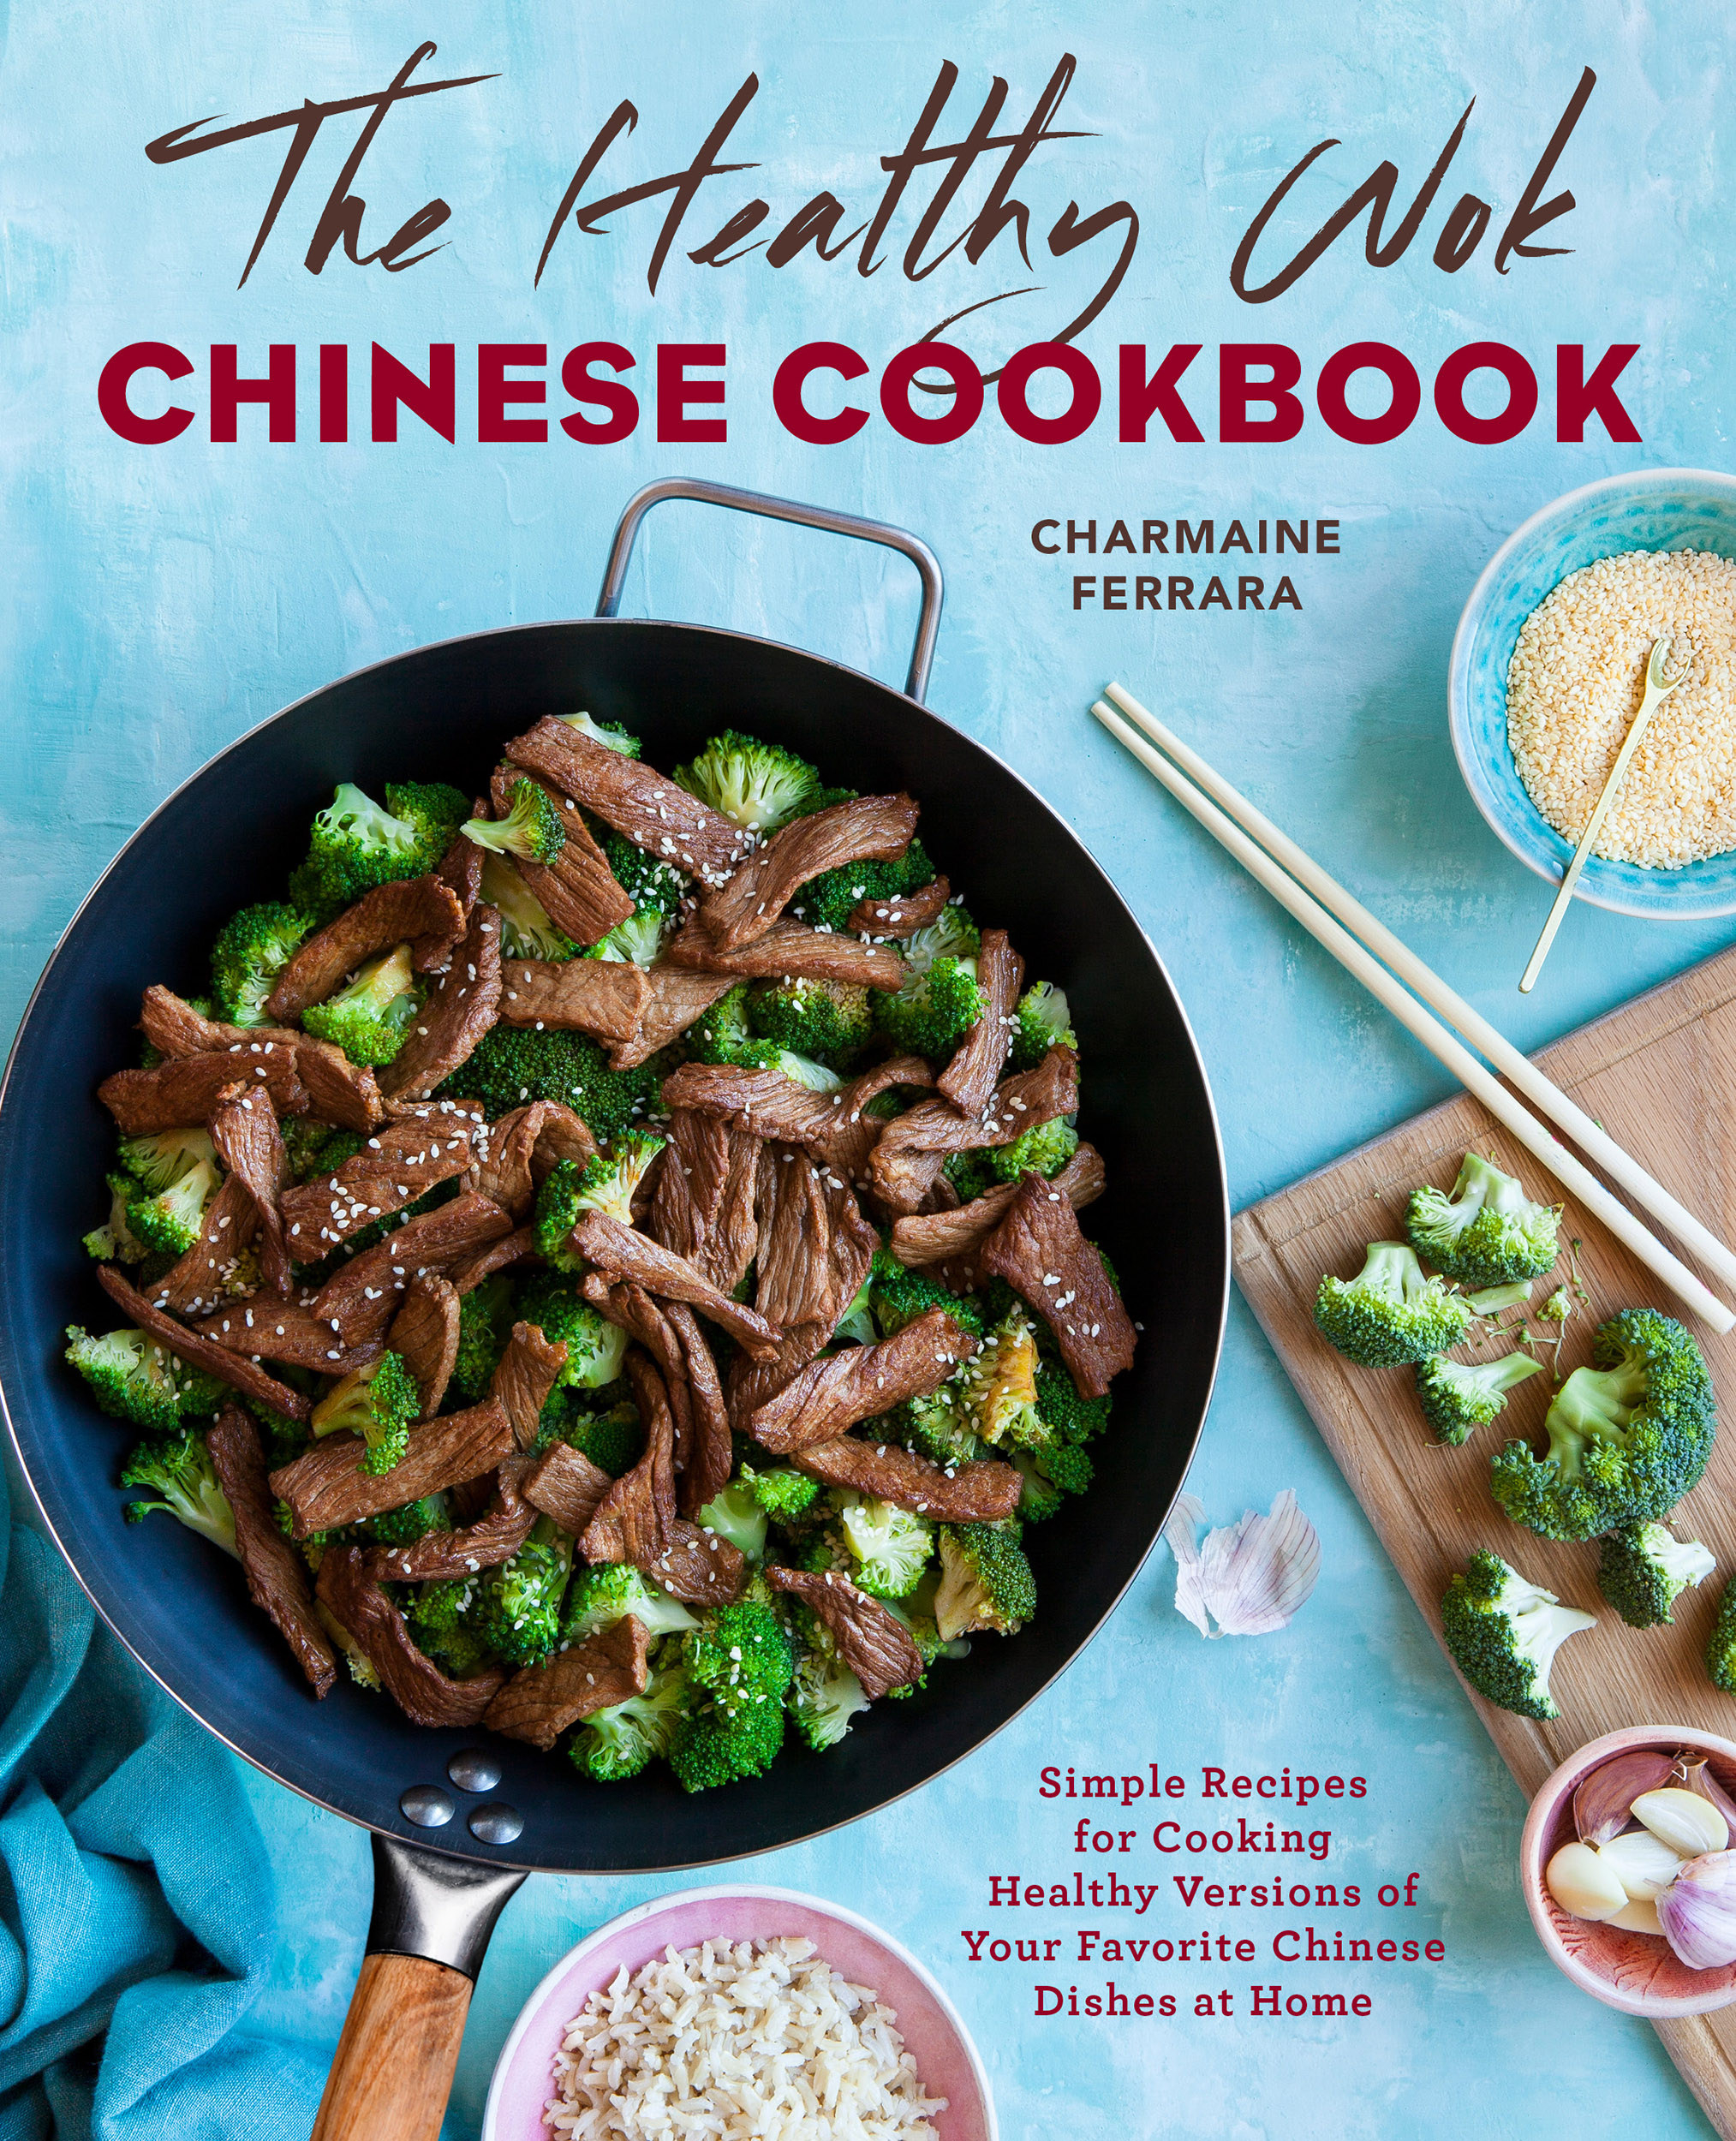 Chinese Cookbook cover with a wok and beef and broccoli on the table